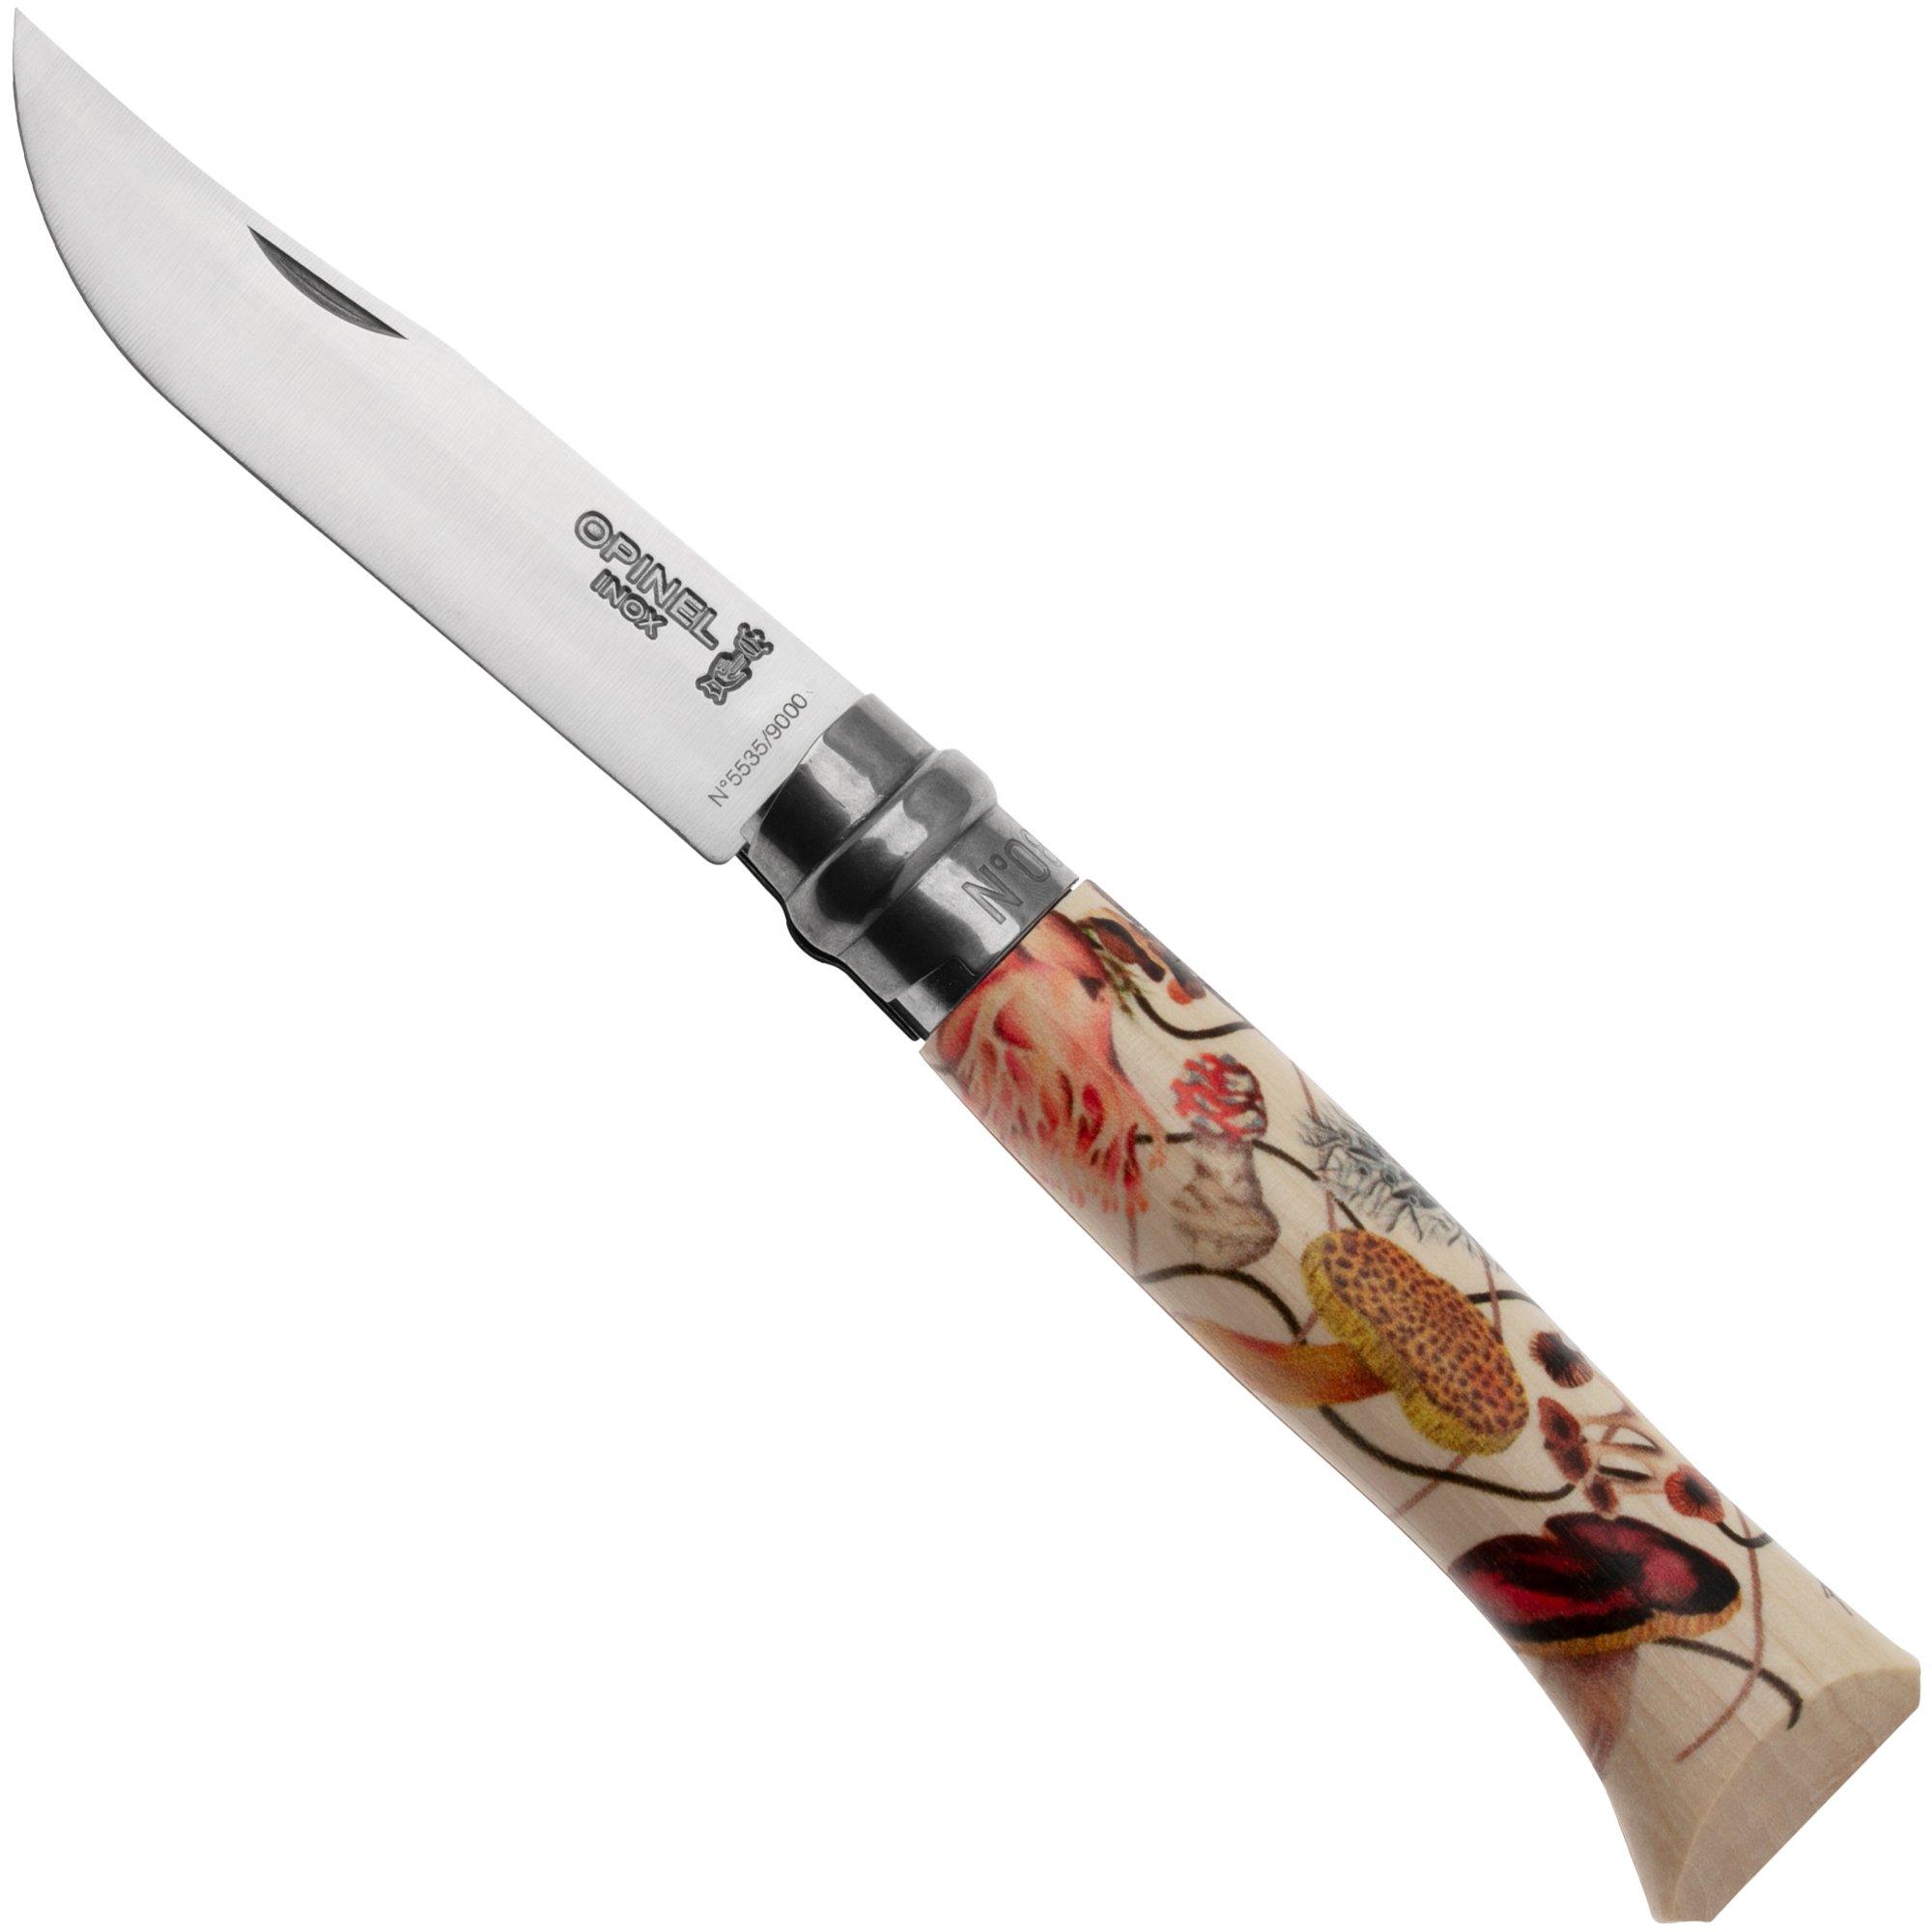 Opinel No. 08 Nature Edition 002601 stainless steel, Limited Edition pocket knife, Rommy González design